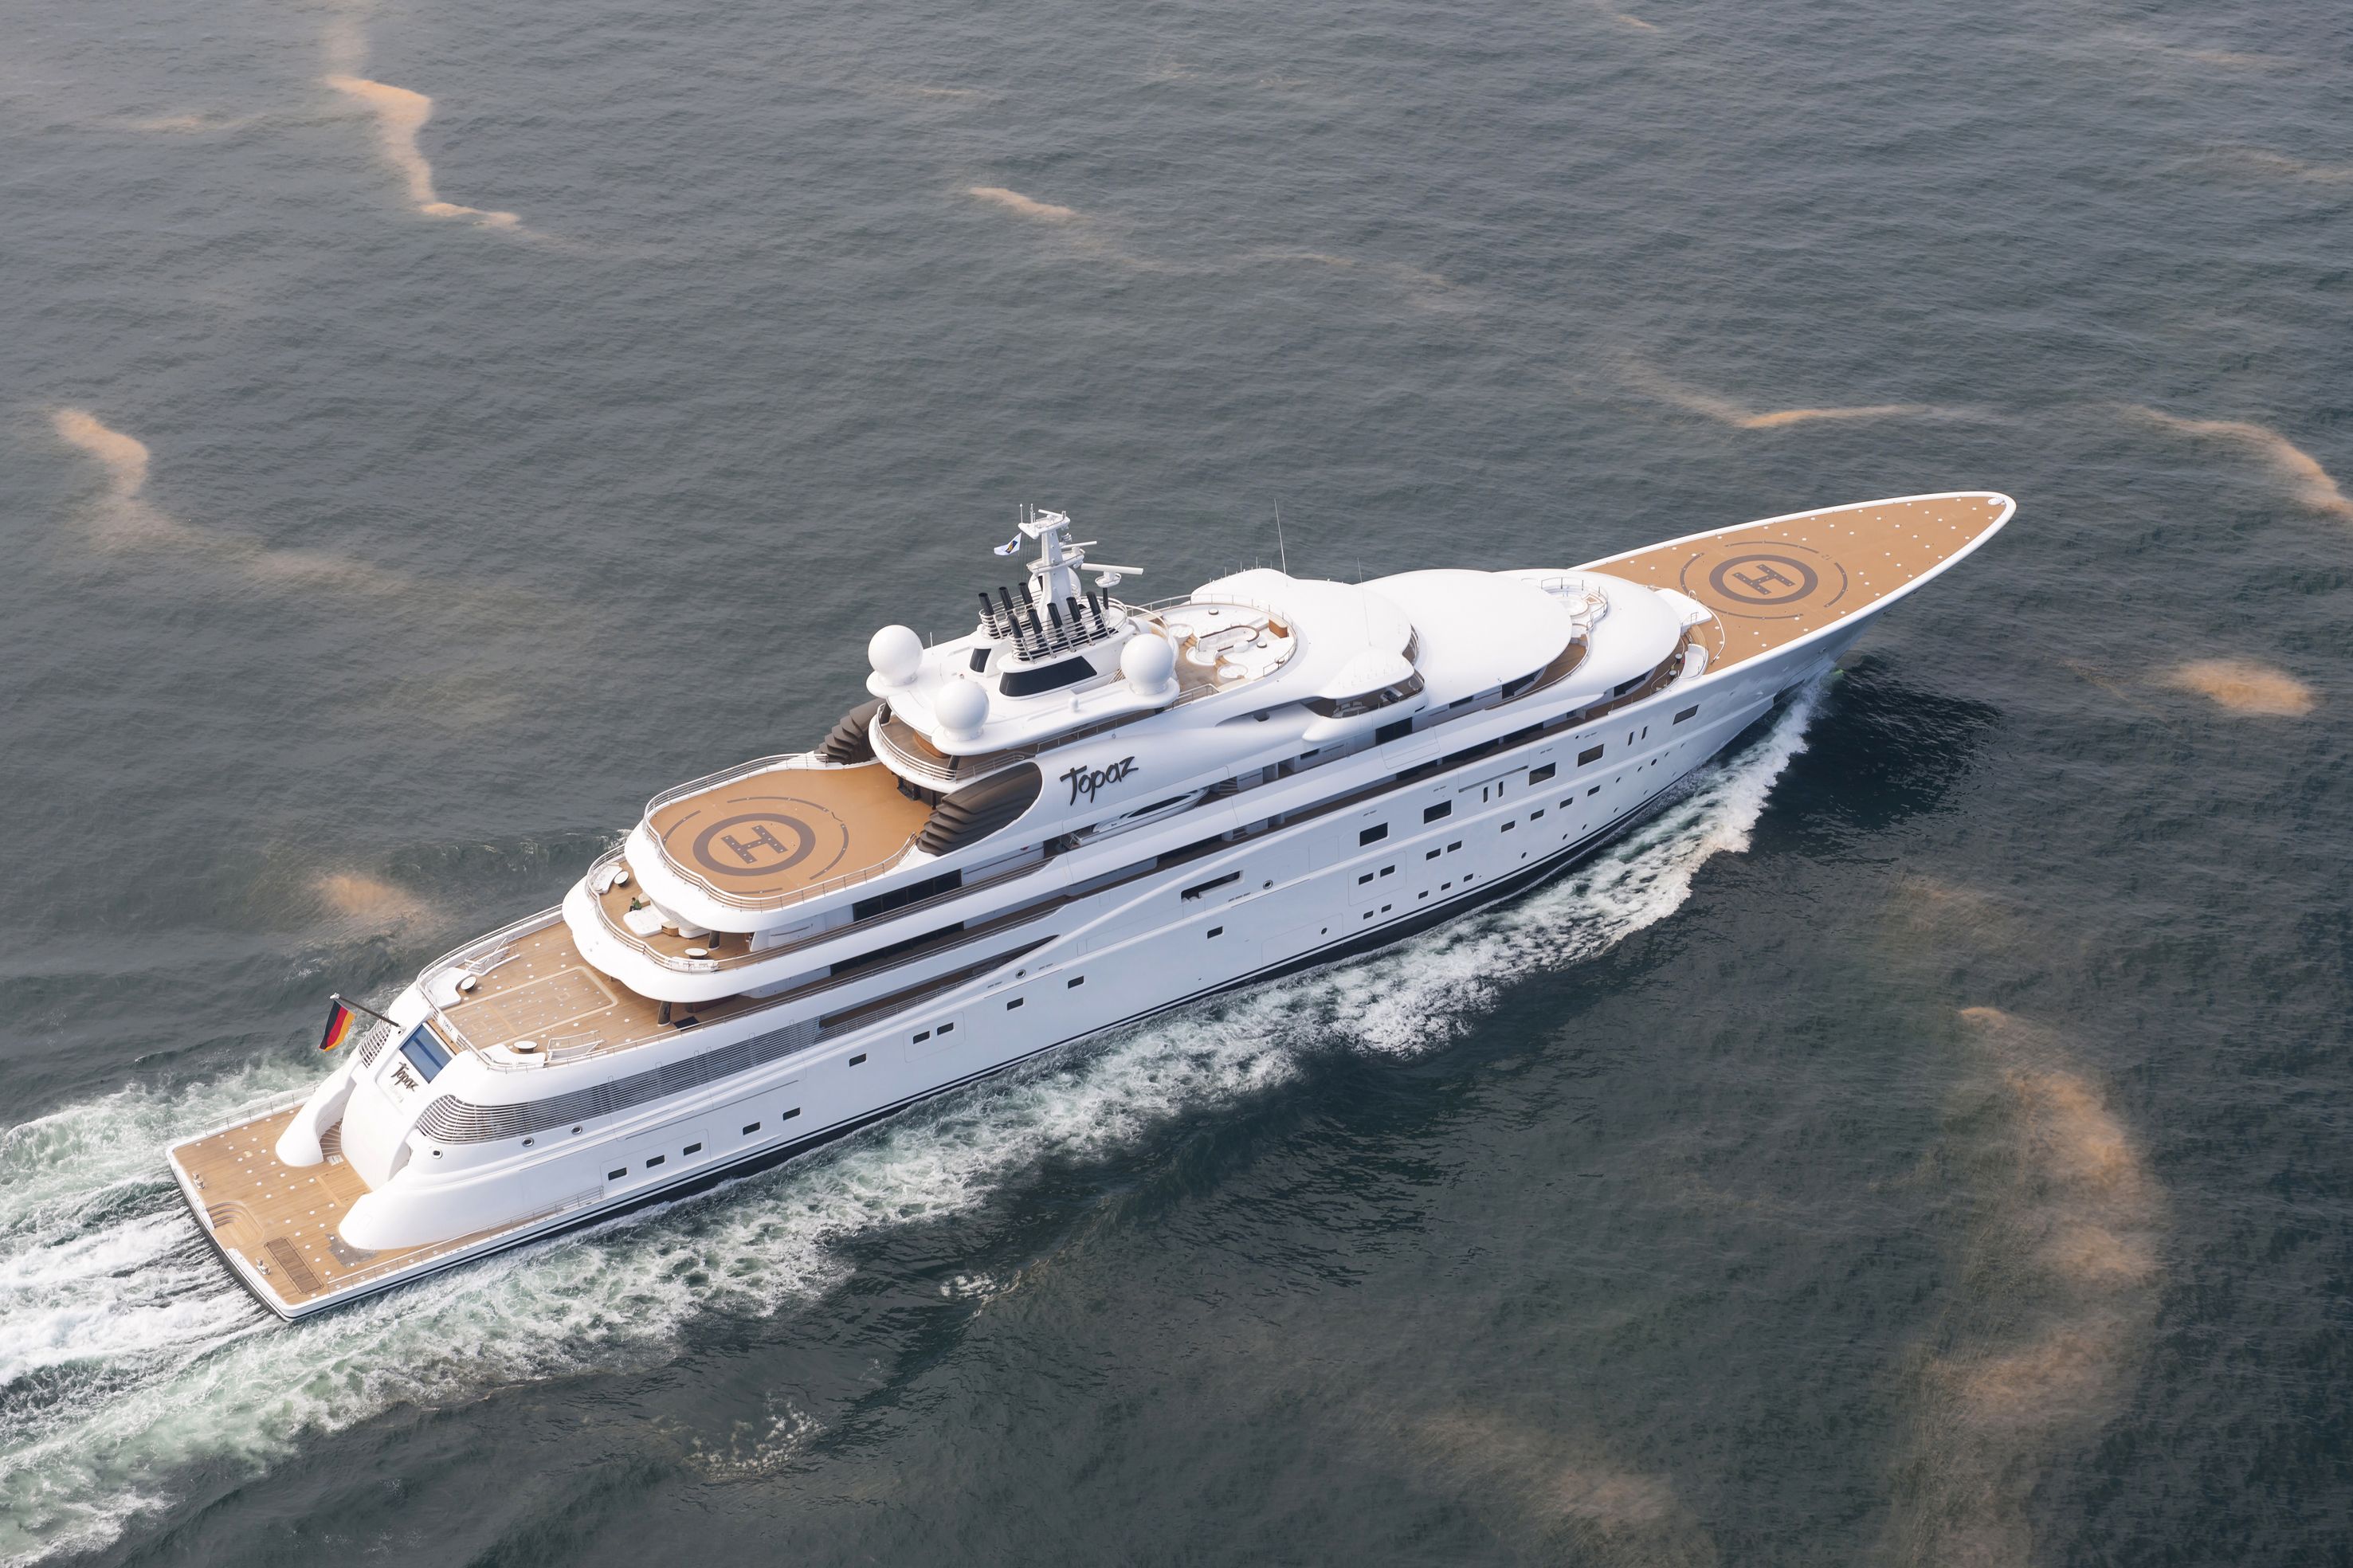 Inside the World of Mega Yachts — How the Super Rich Find Their Dream Boats